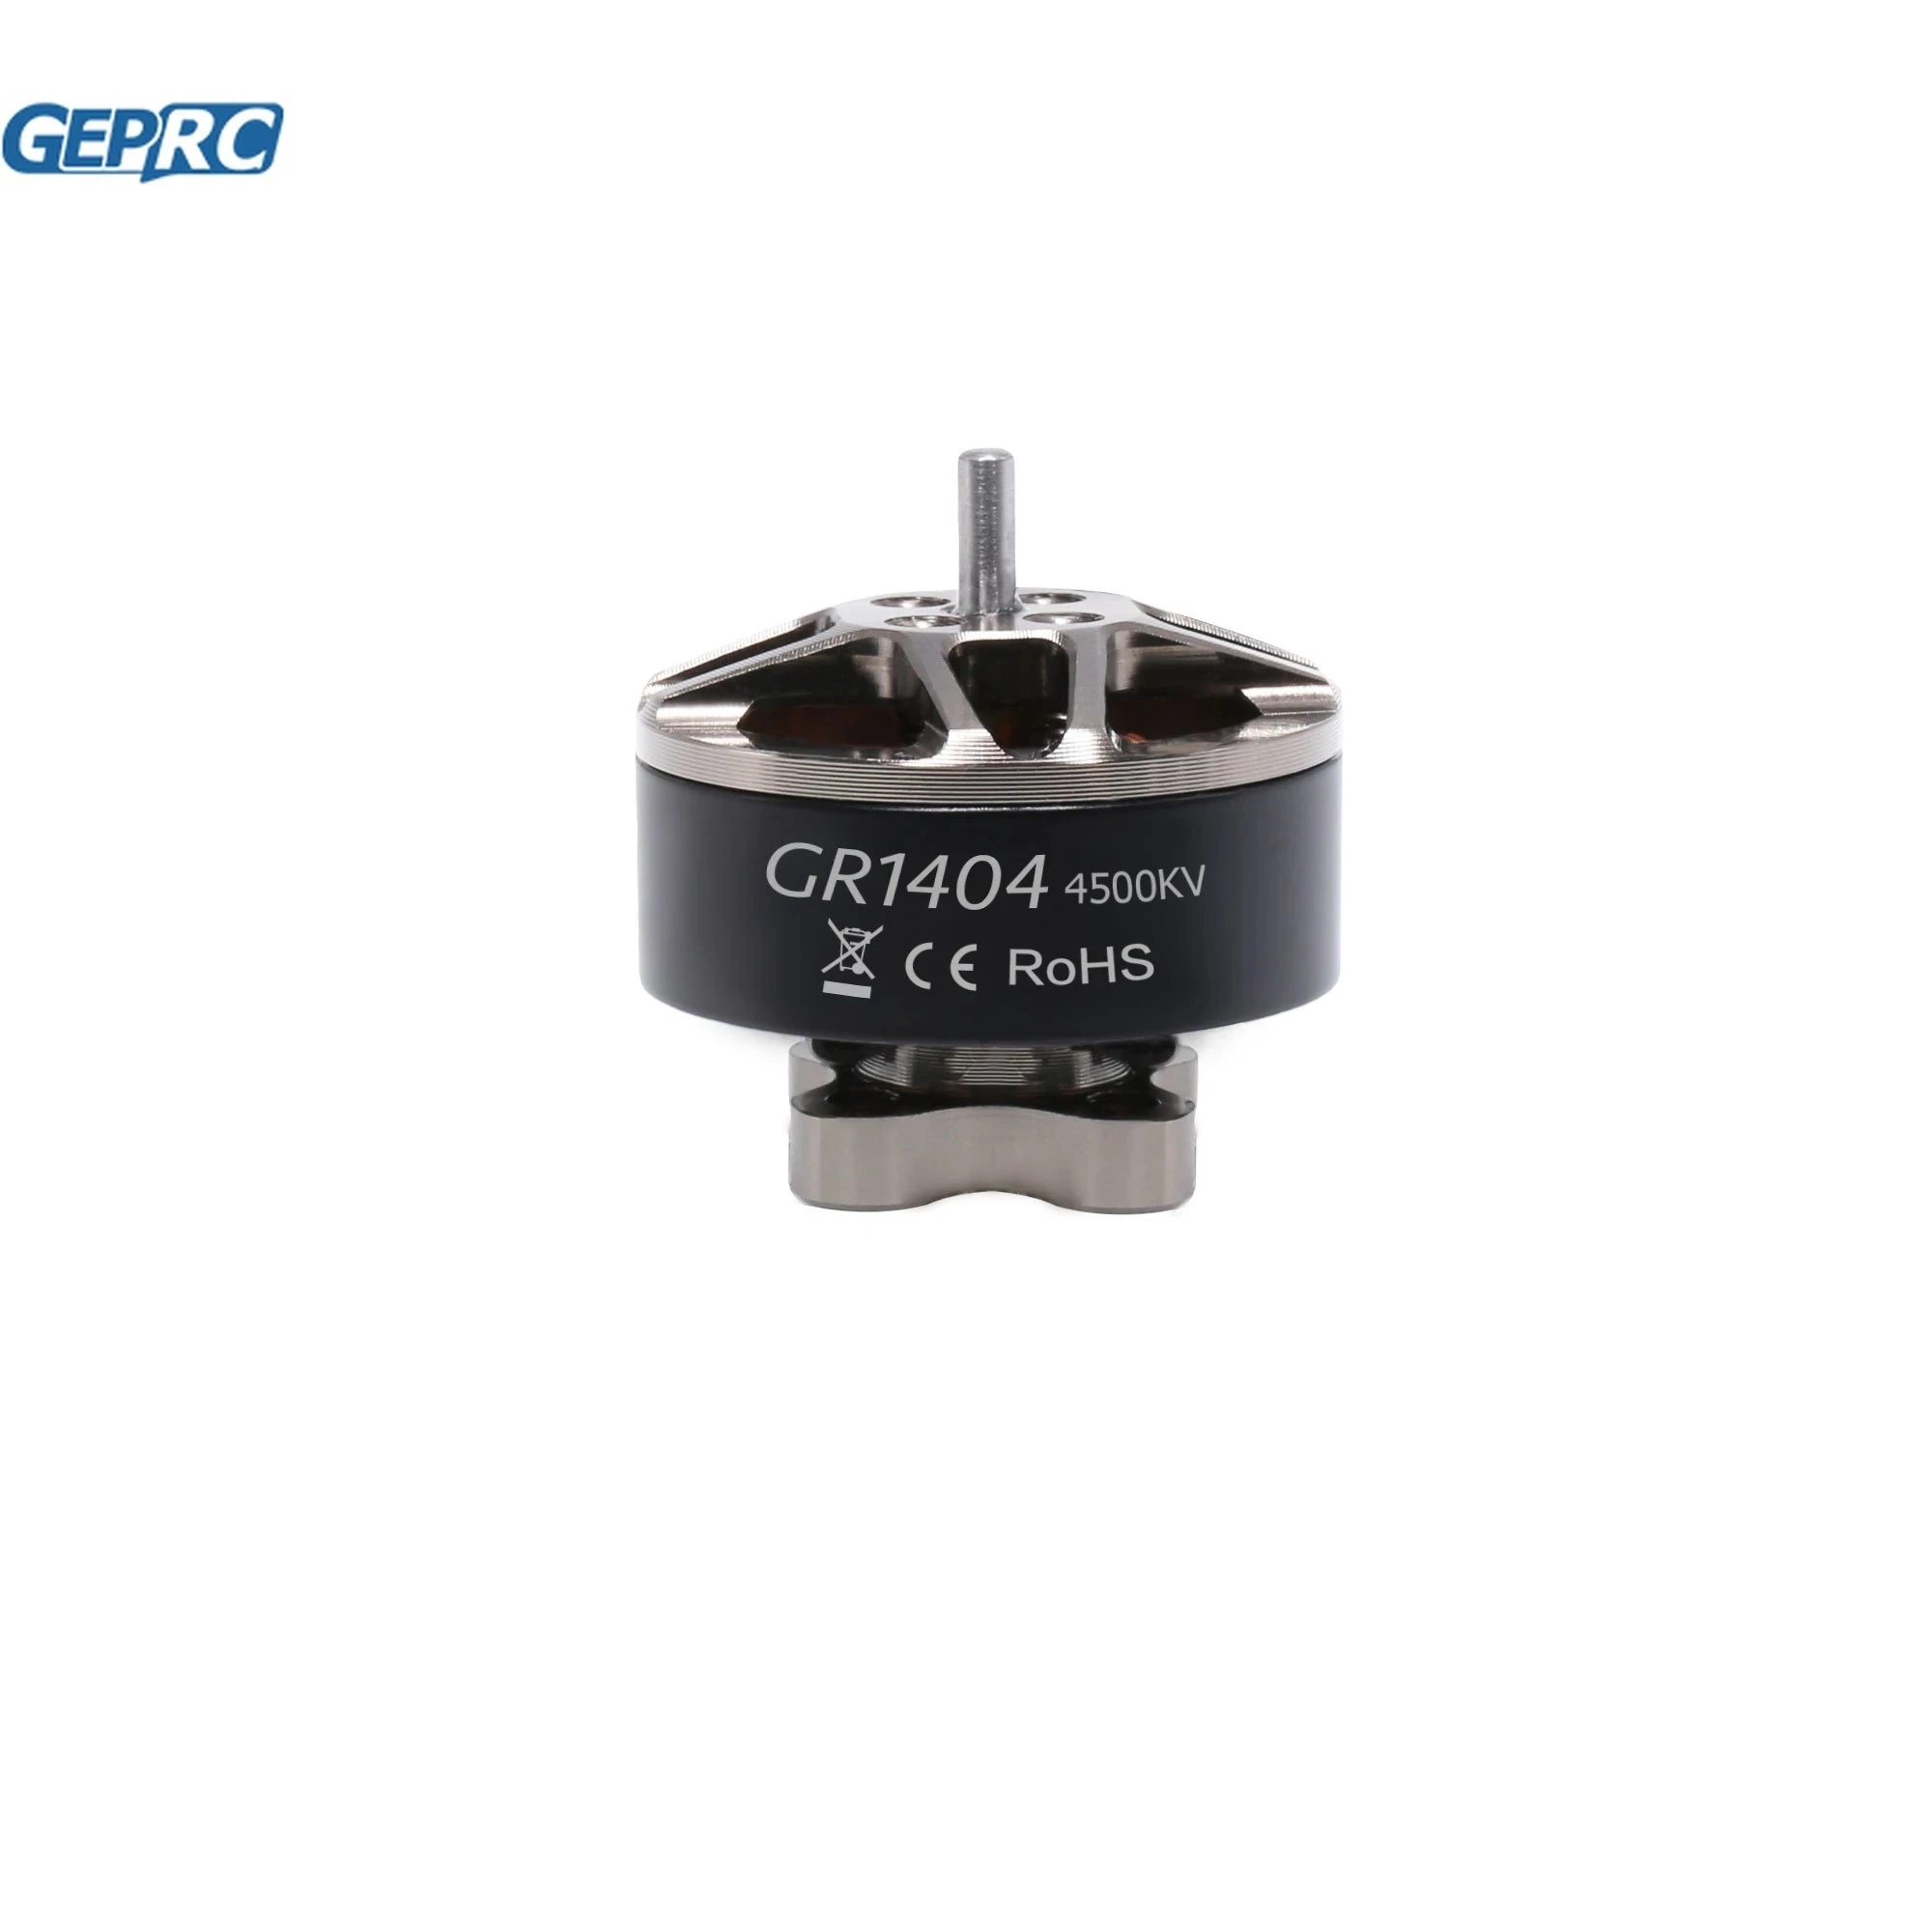 GEPRC GR1404 4500KV Motor Suitable For Cinelog 25 Series Drone For RC FPV Quadcopter Drone Accessories Replacement Parts